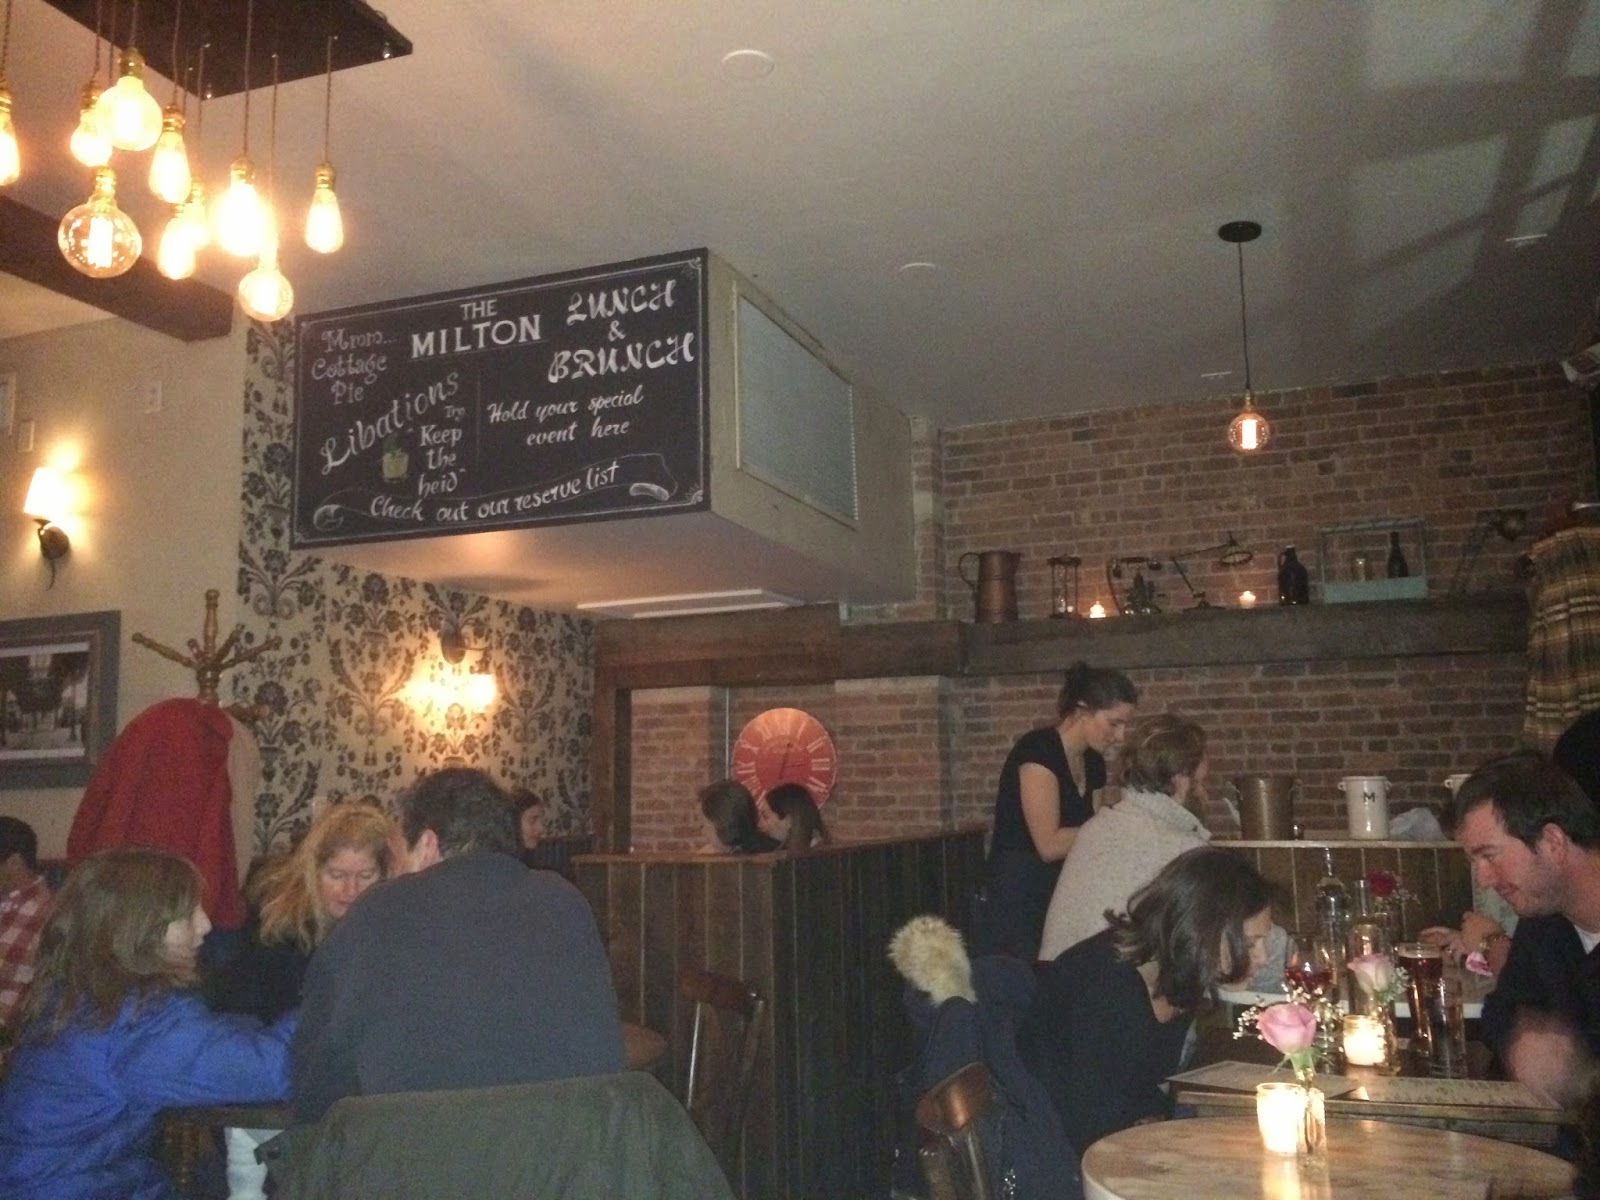 Interior Image - When we arrived, we took a liking to the homey and comfortable decor of the place - the exposed brick and candlelit tables warmed us up immediately